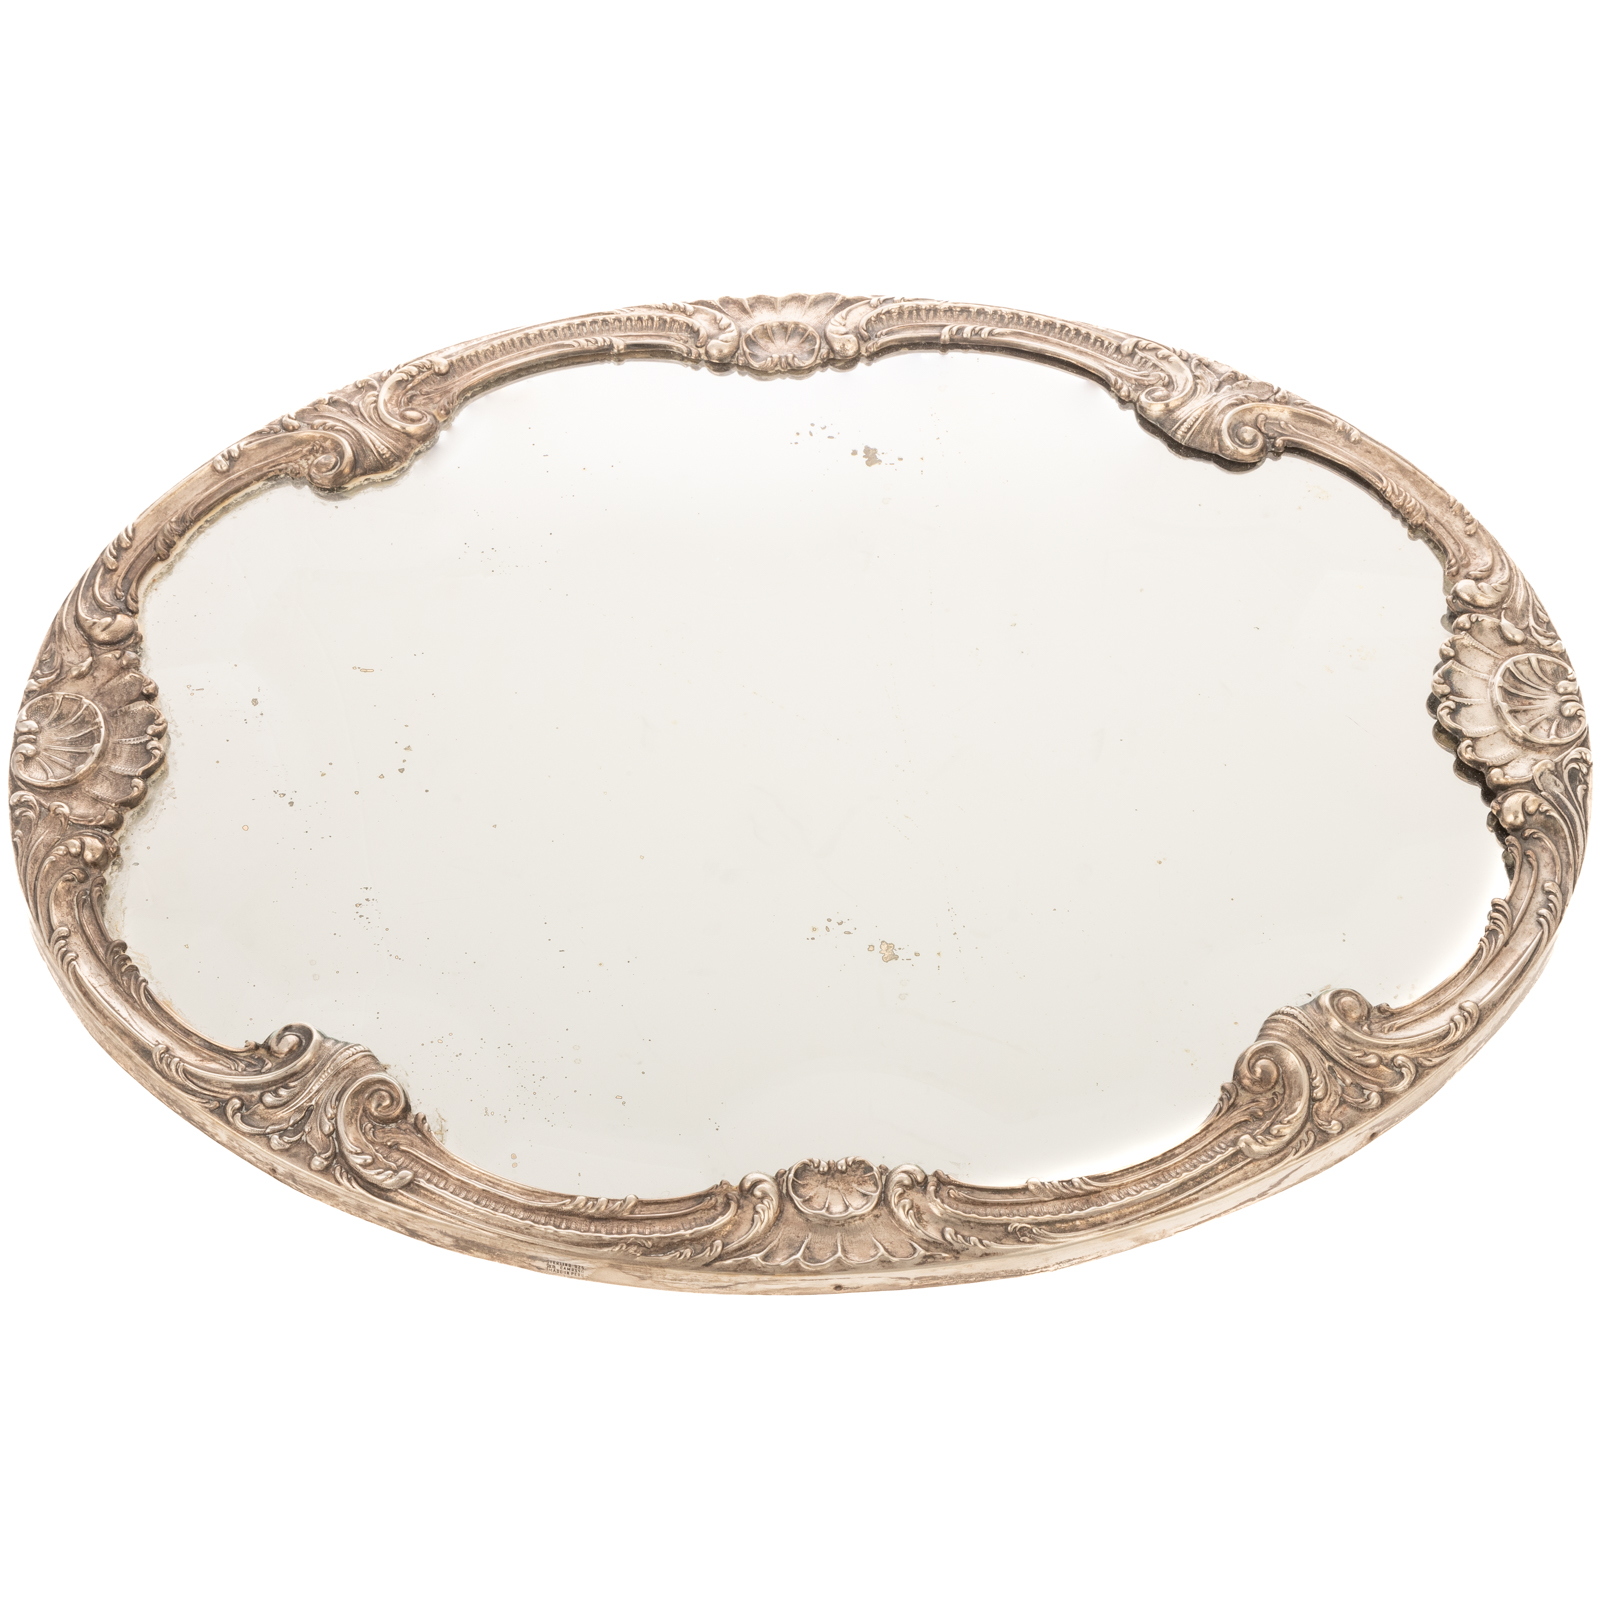 CAMUSSO STERLING-MOUNTED MIRRORED